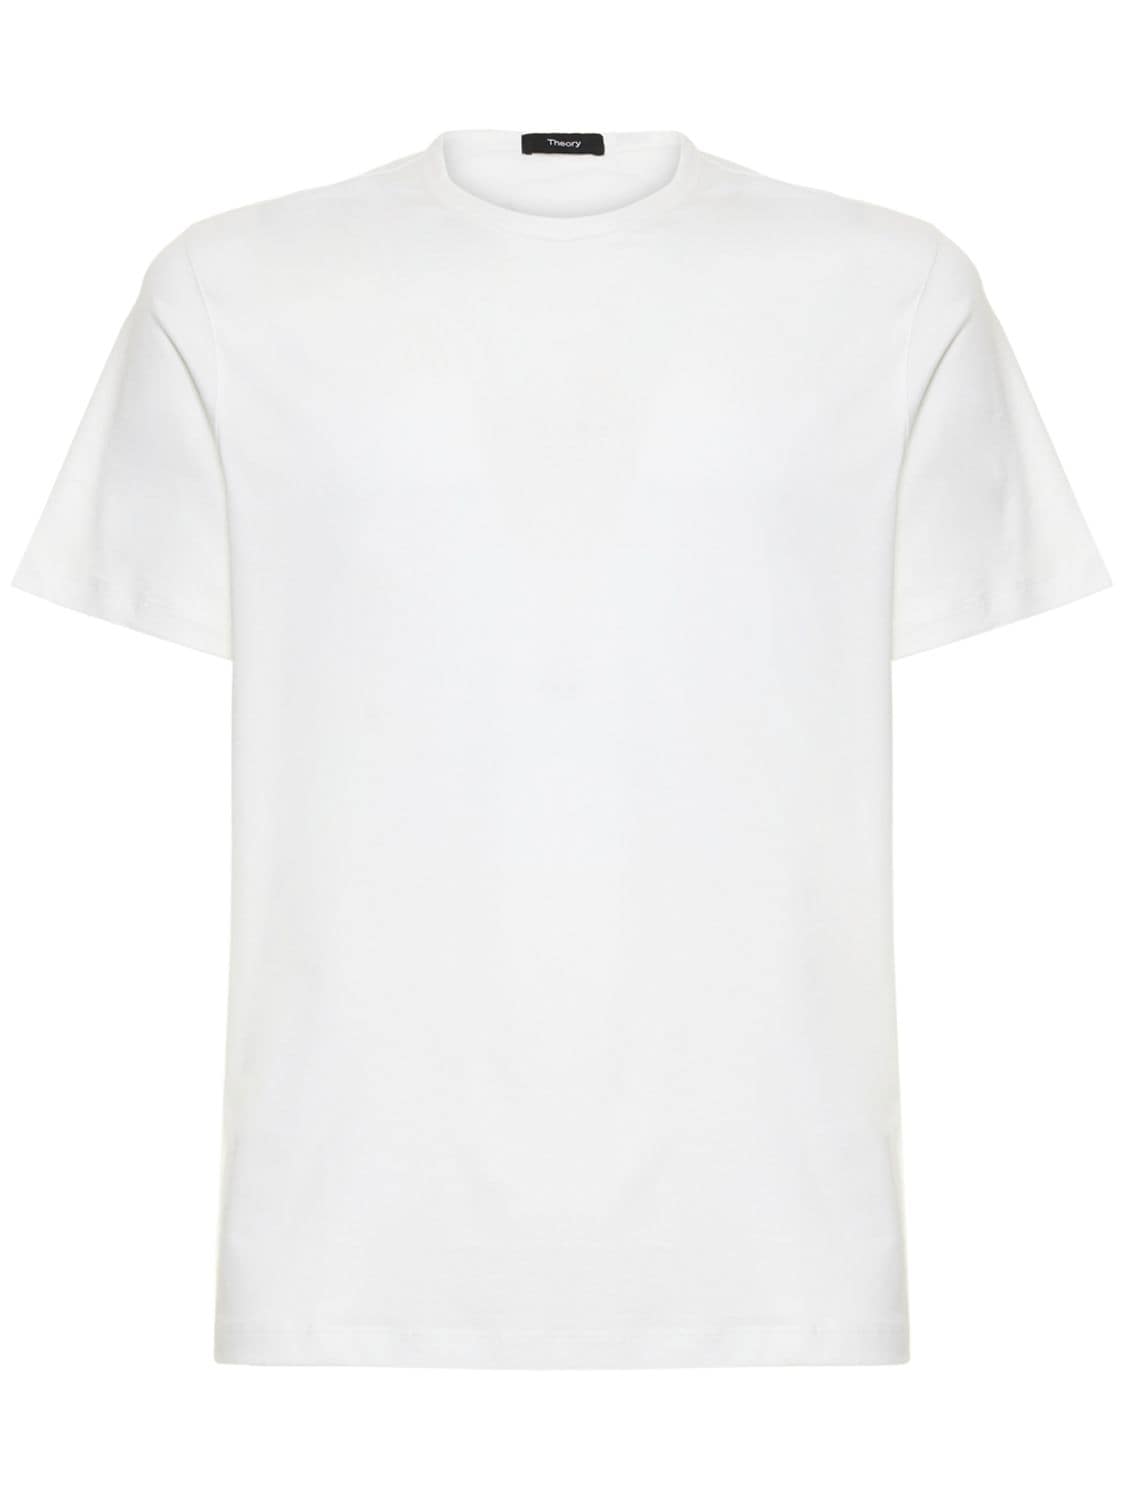 Theory Cotton Luxe S/s T-shirt In White